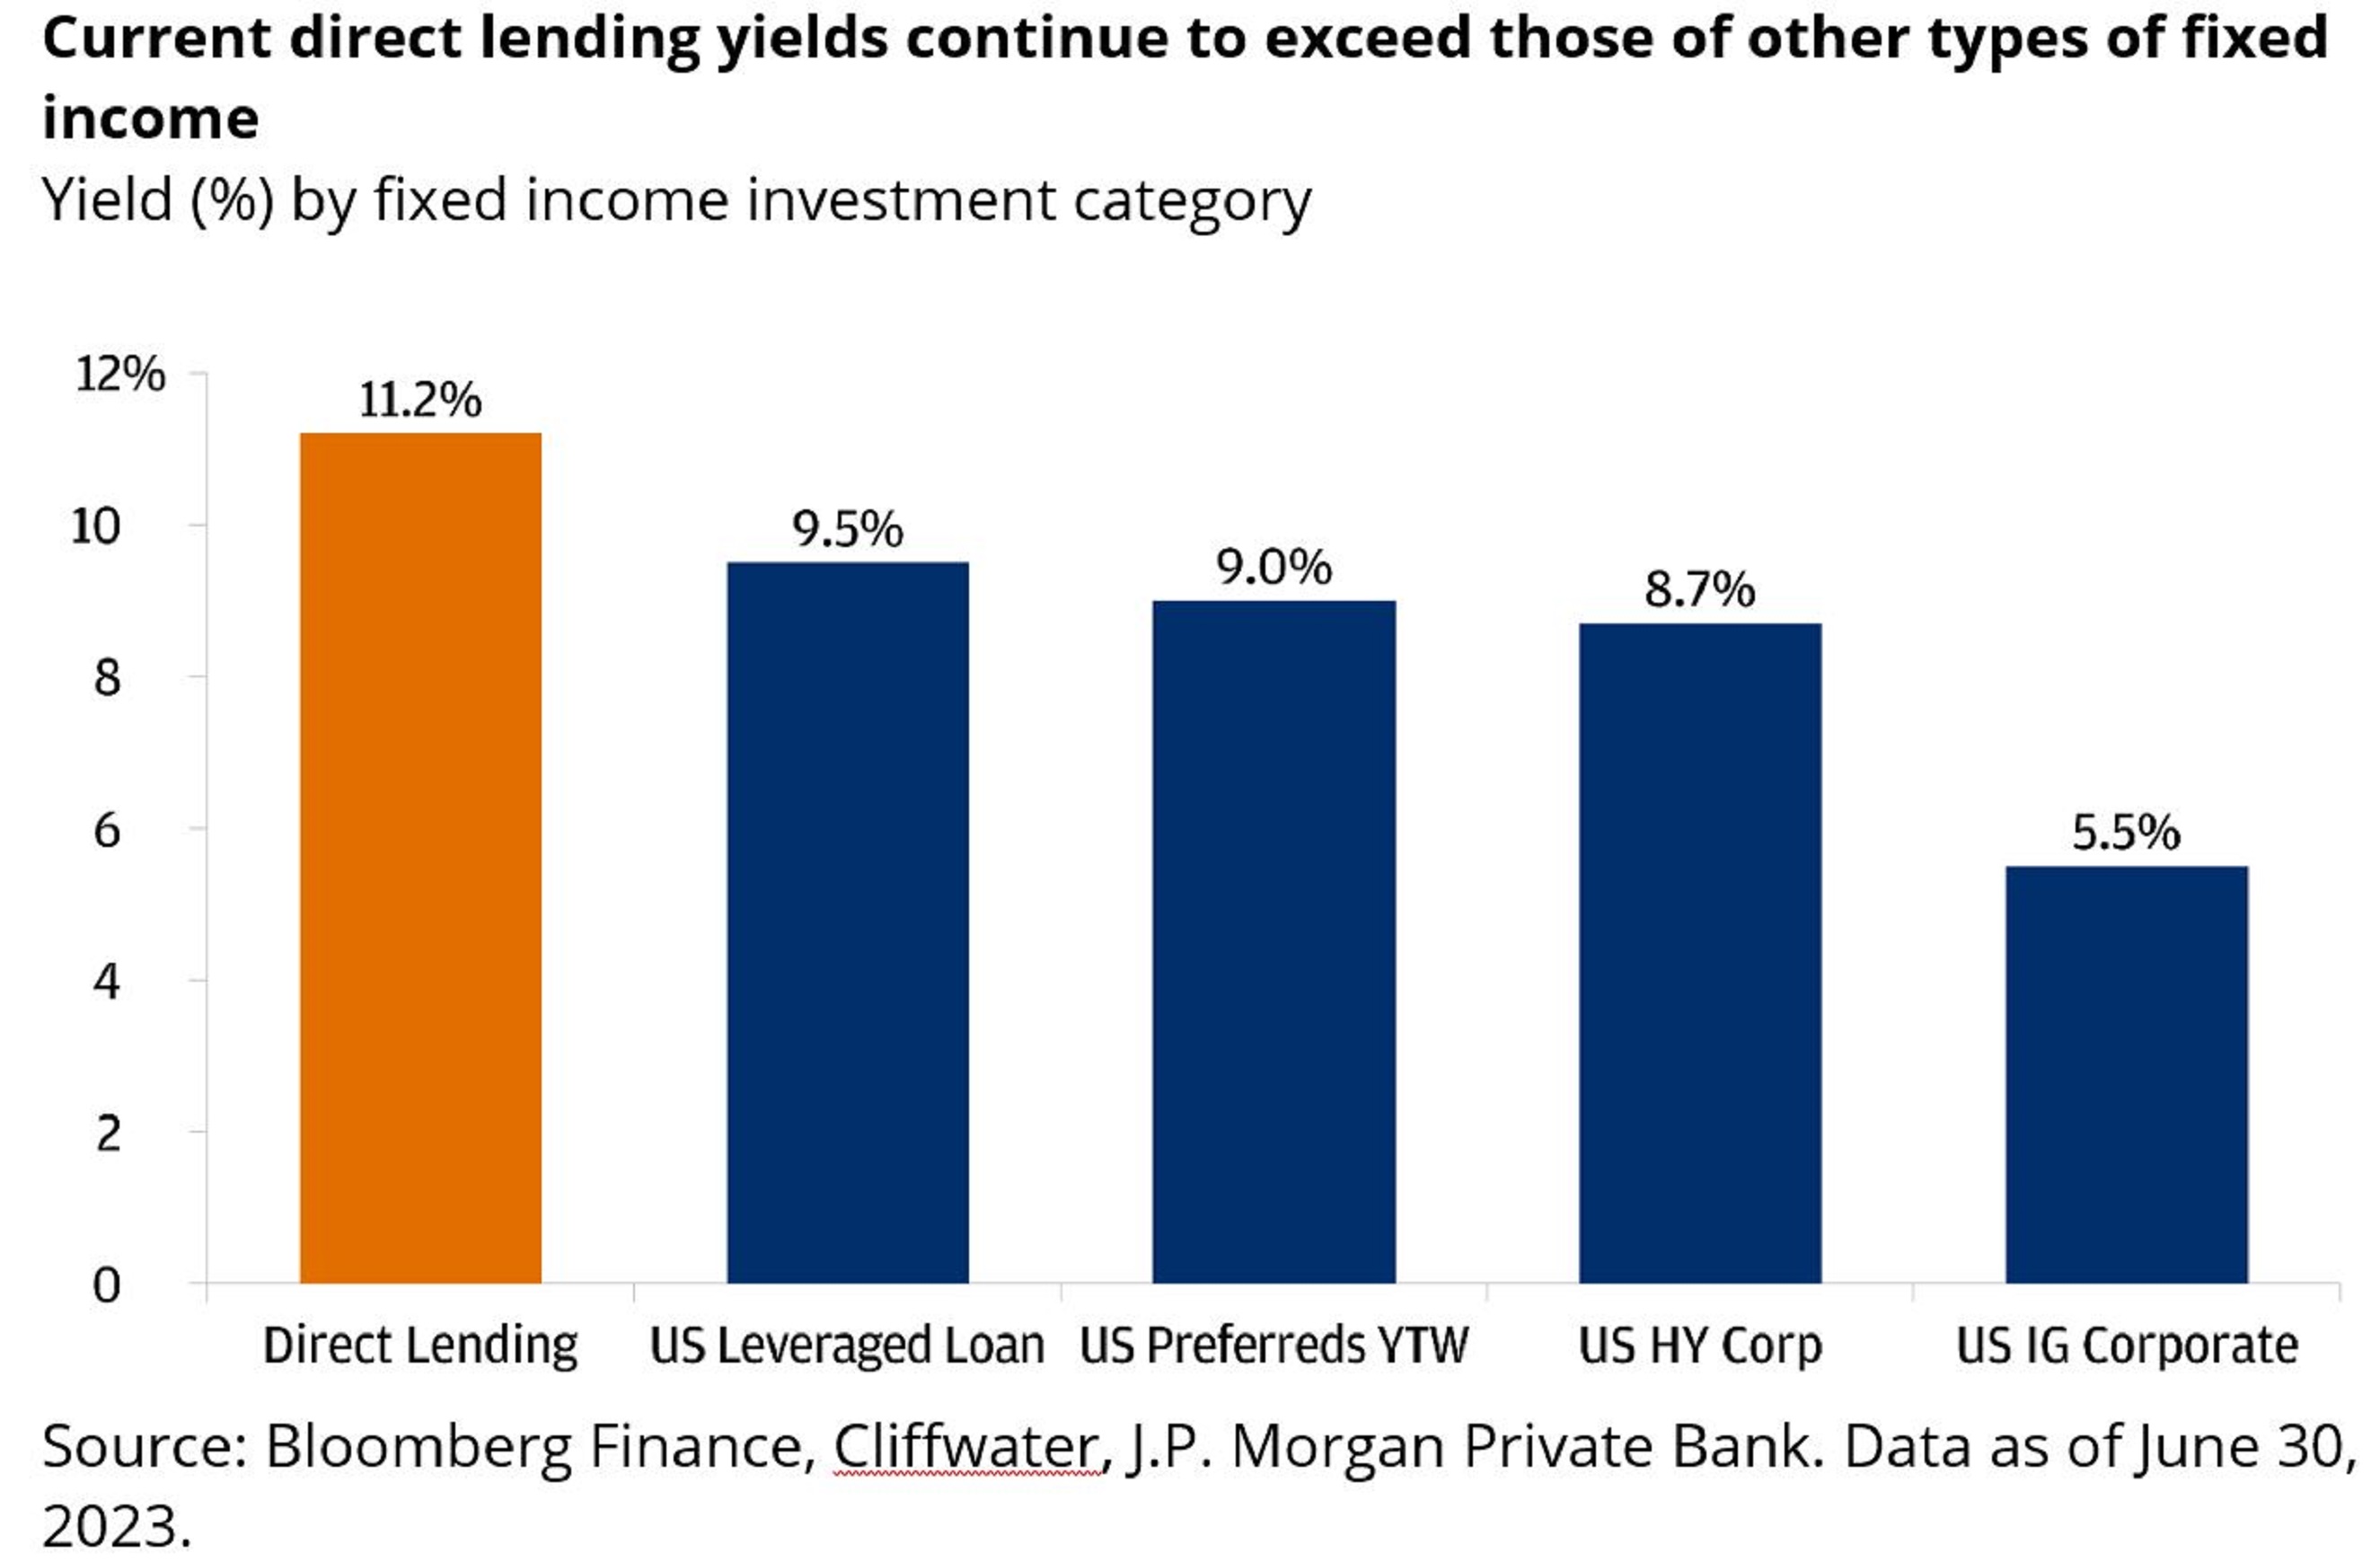 This graph shows that current direct lending yields exceed other types of fixed income.